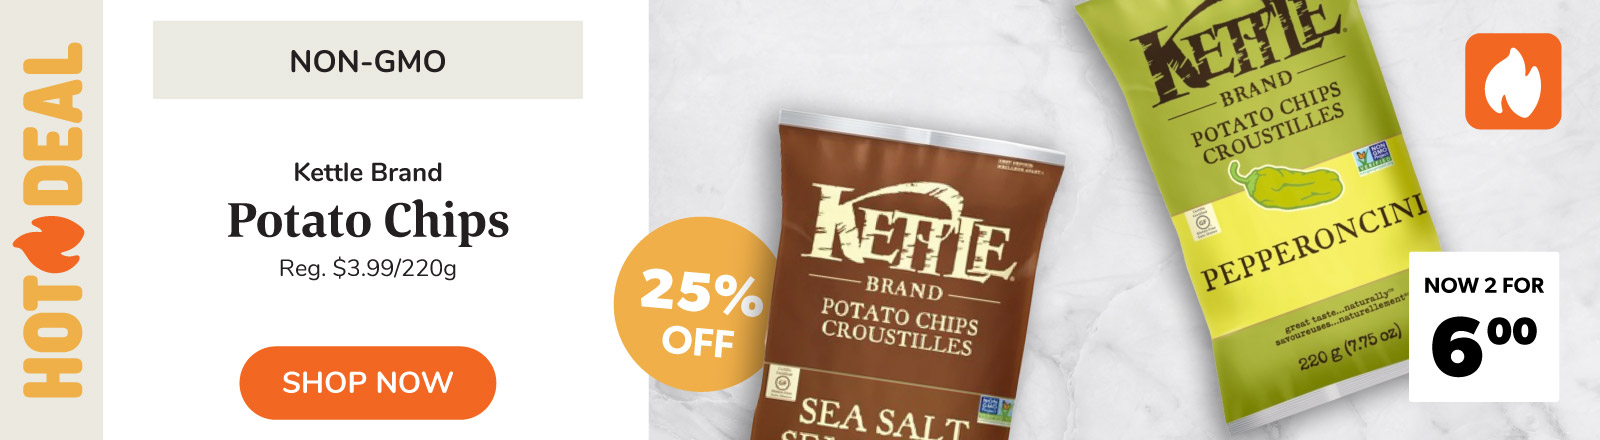 2 for $6 Kettle Chips this week! 